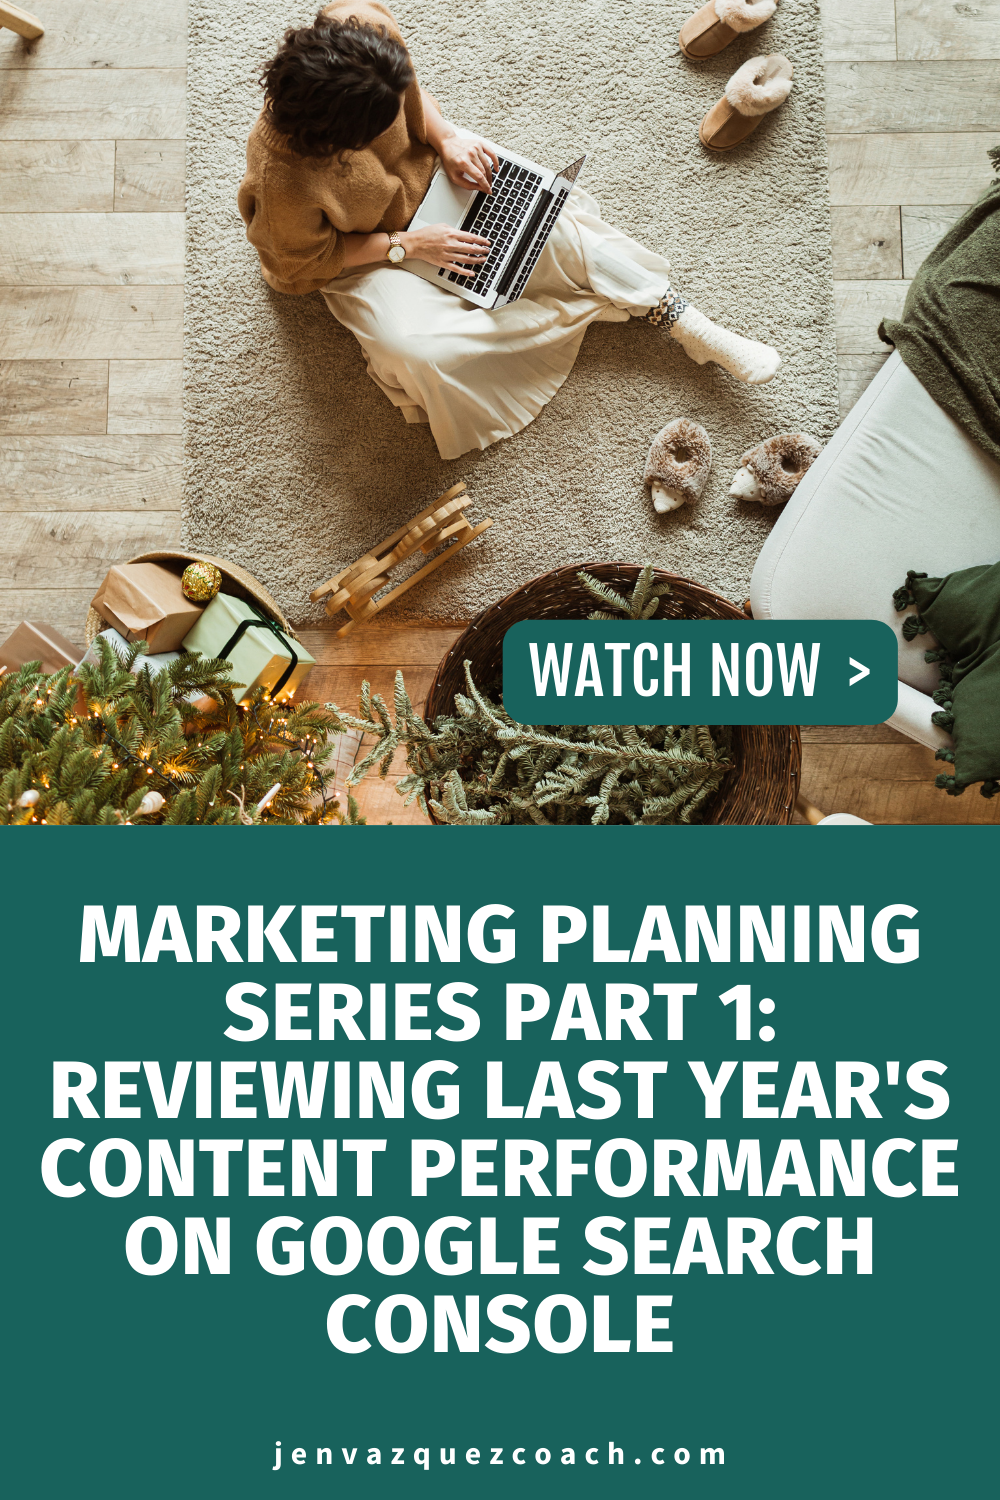 Marketing Planning Series Part 1: Reviewing Last Year's Content Performance on Google Search Console - A Data-Driven Approach to Marketing: by Jen Vazquez Media